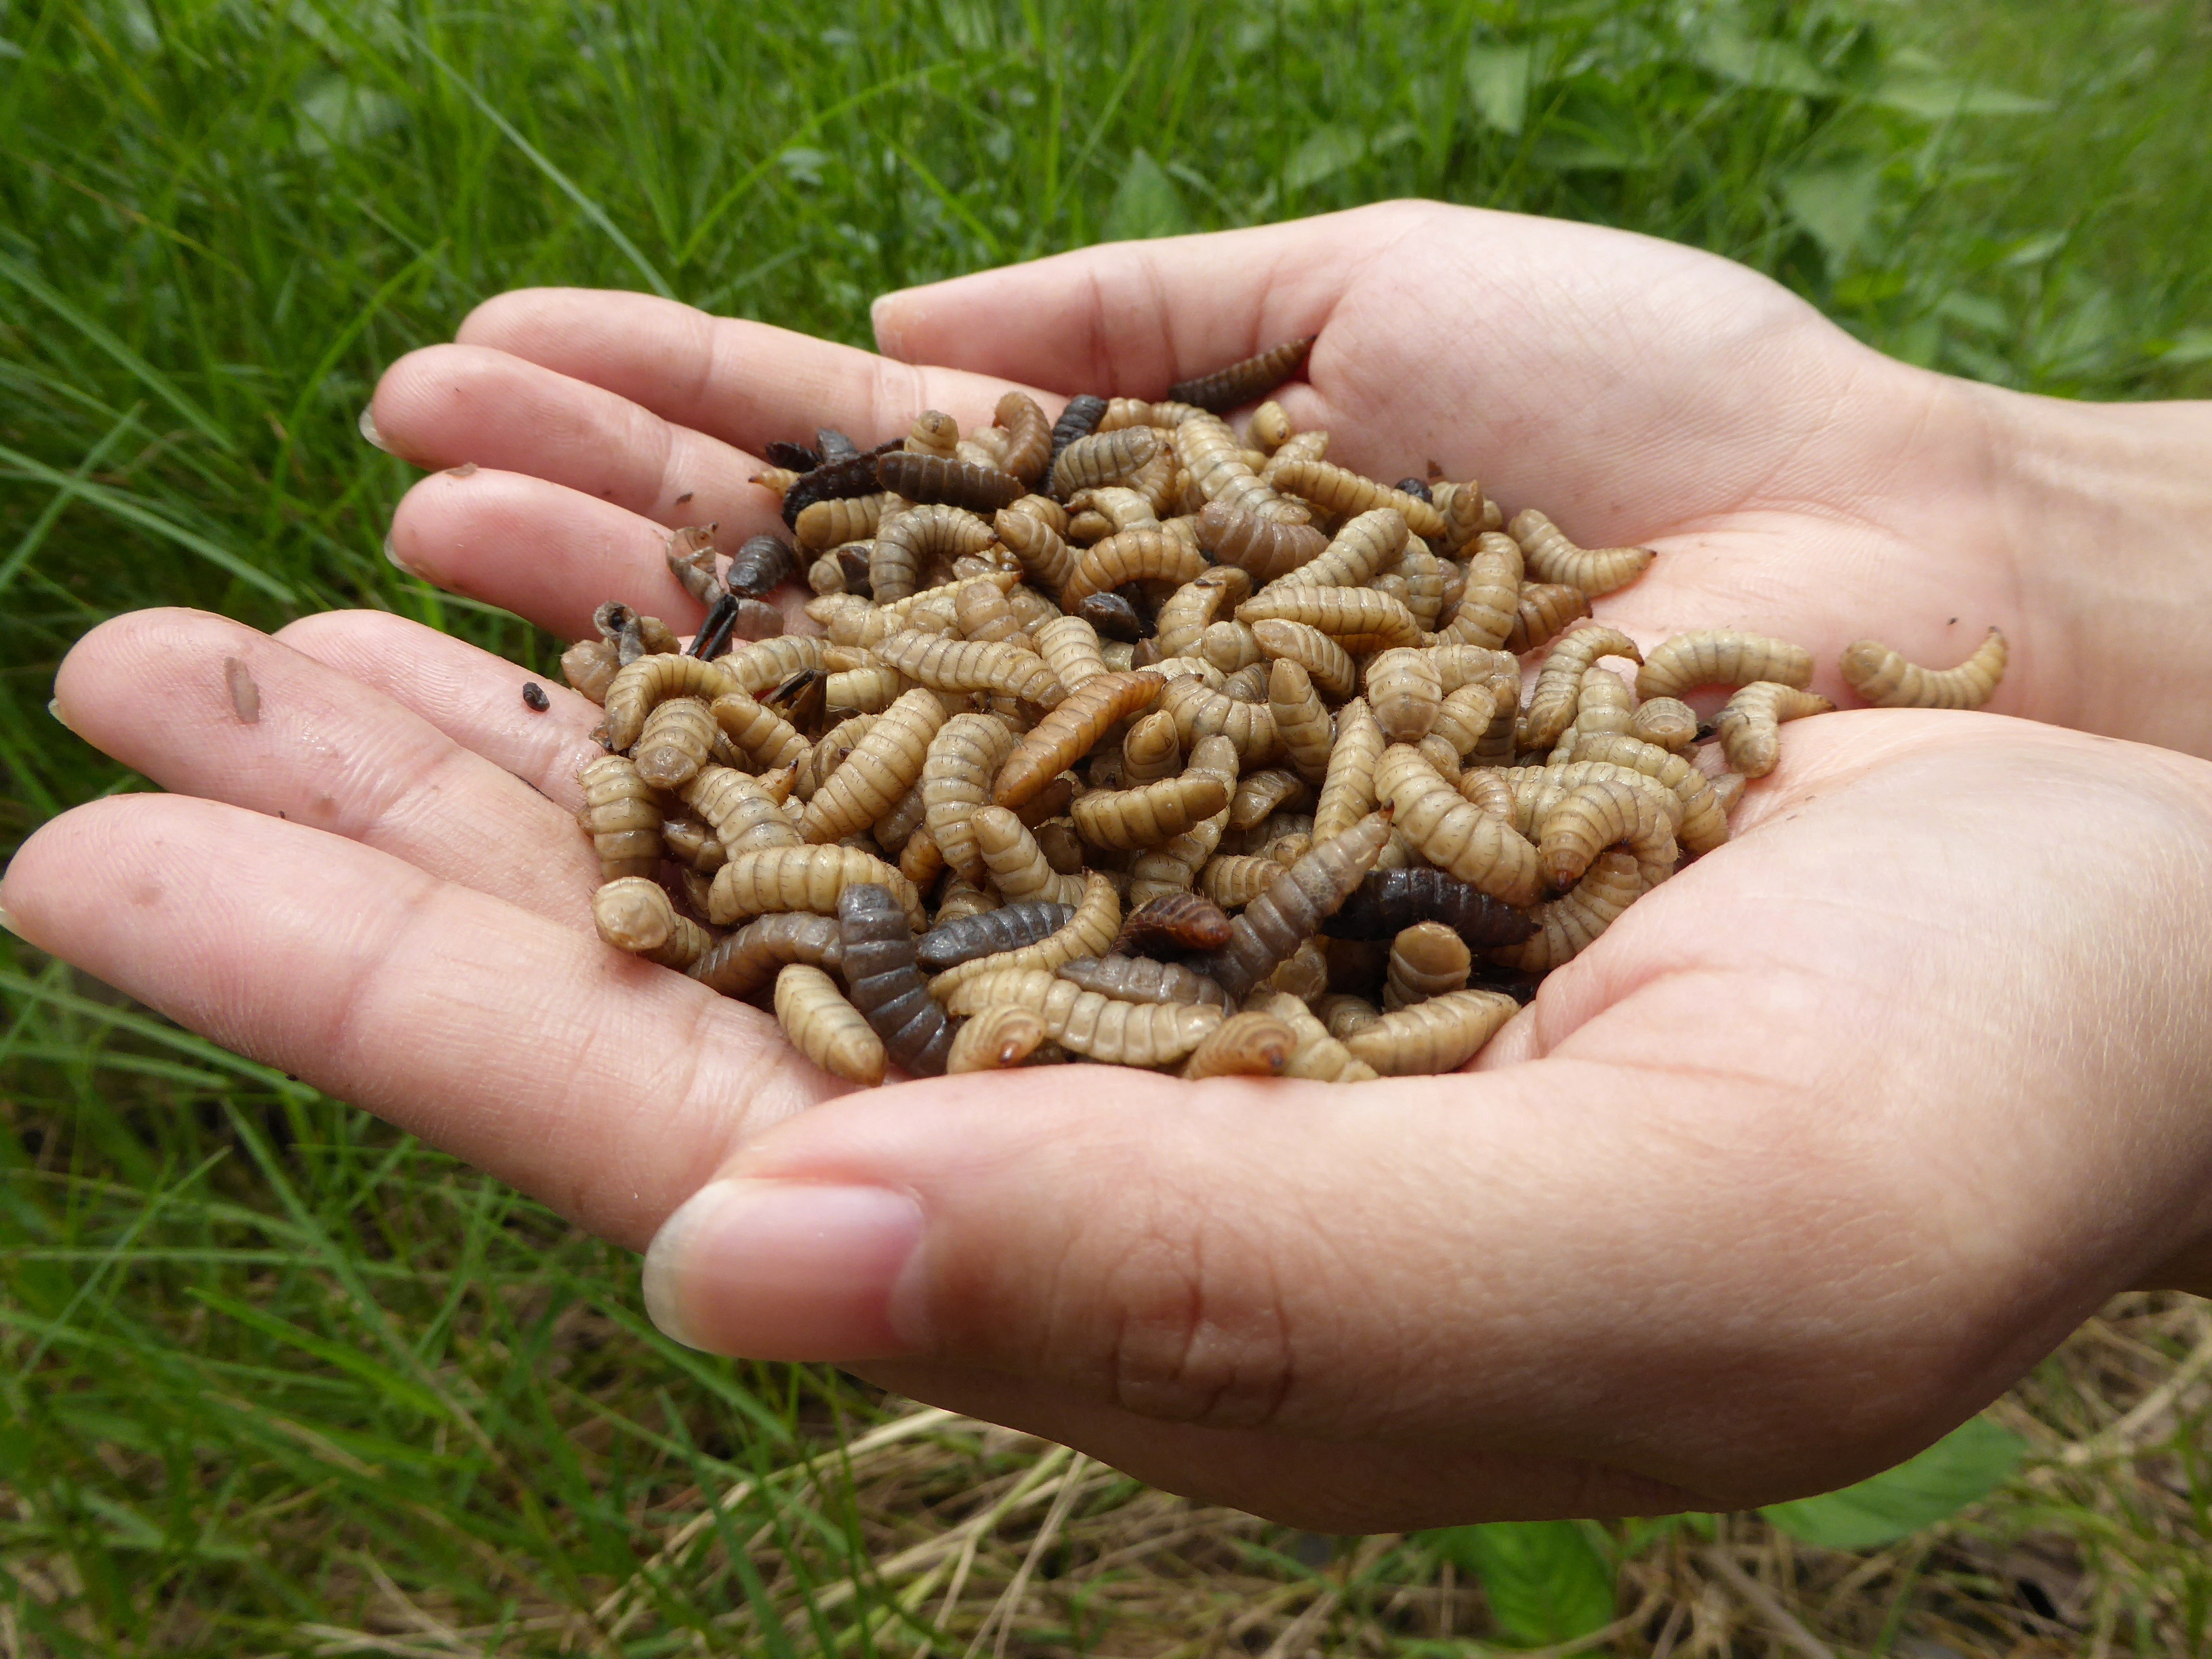 A handful of Black Soldier Fly larvae, photographed in Malaysia